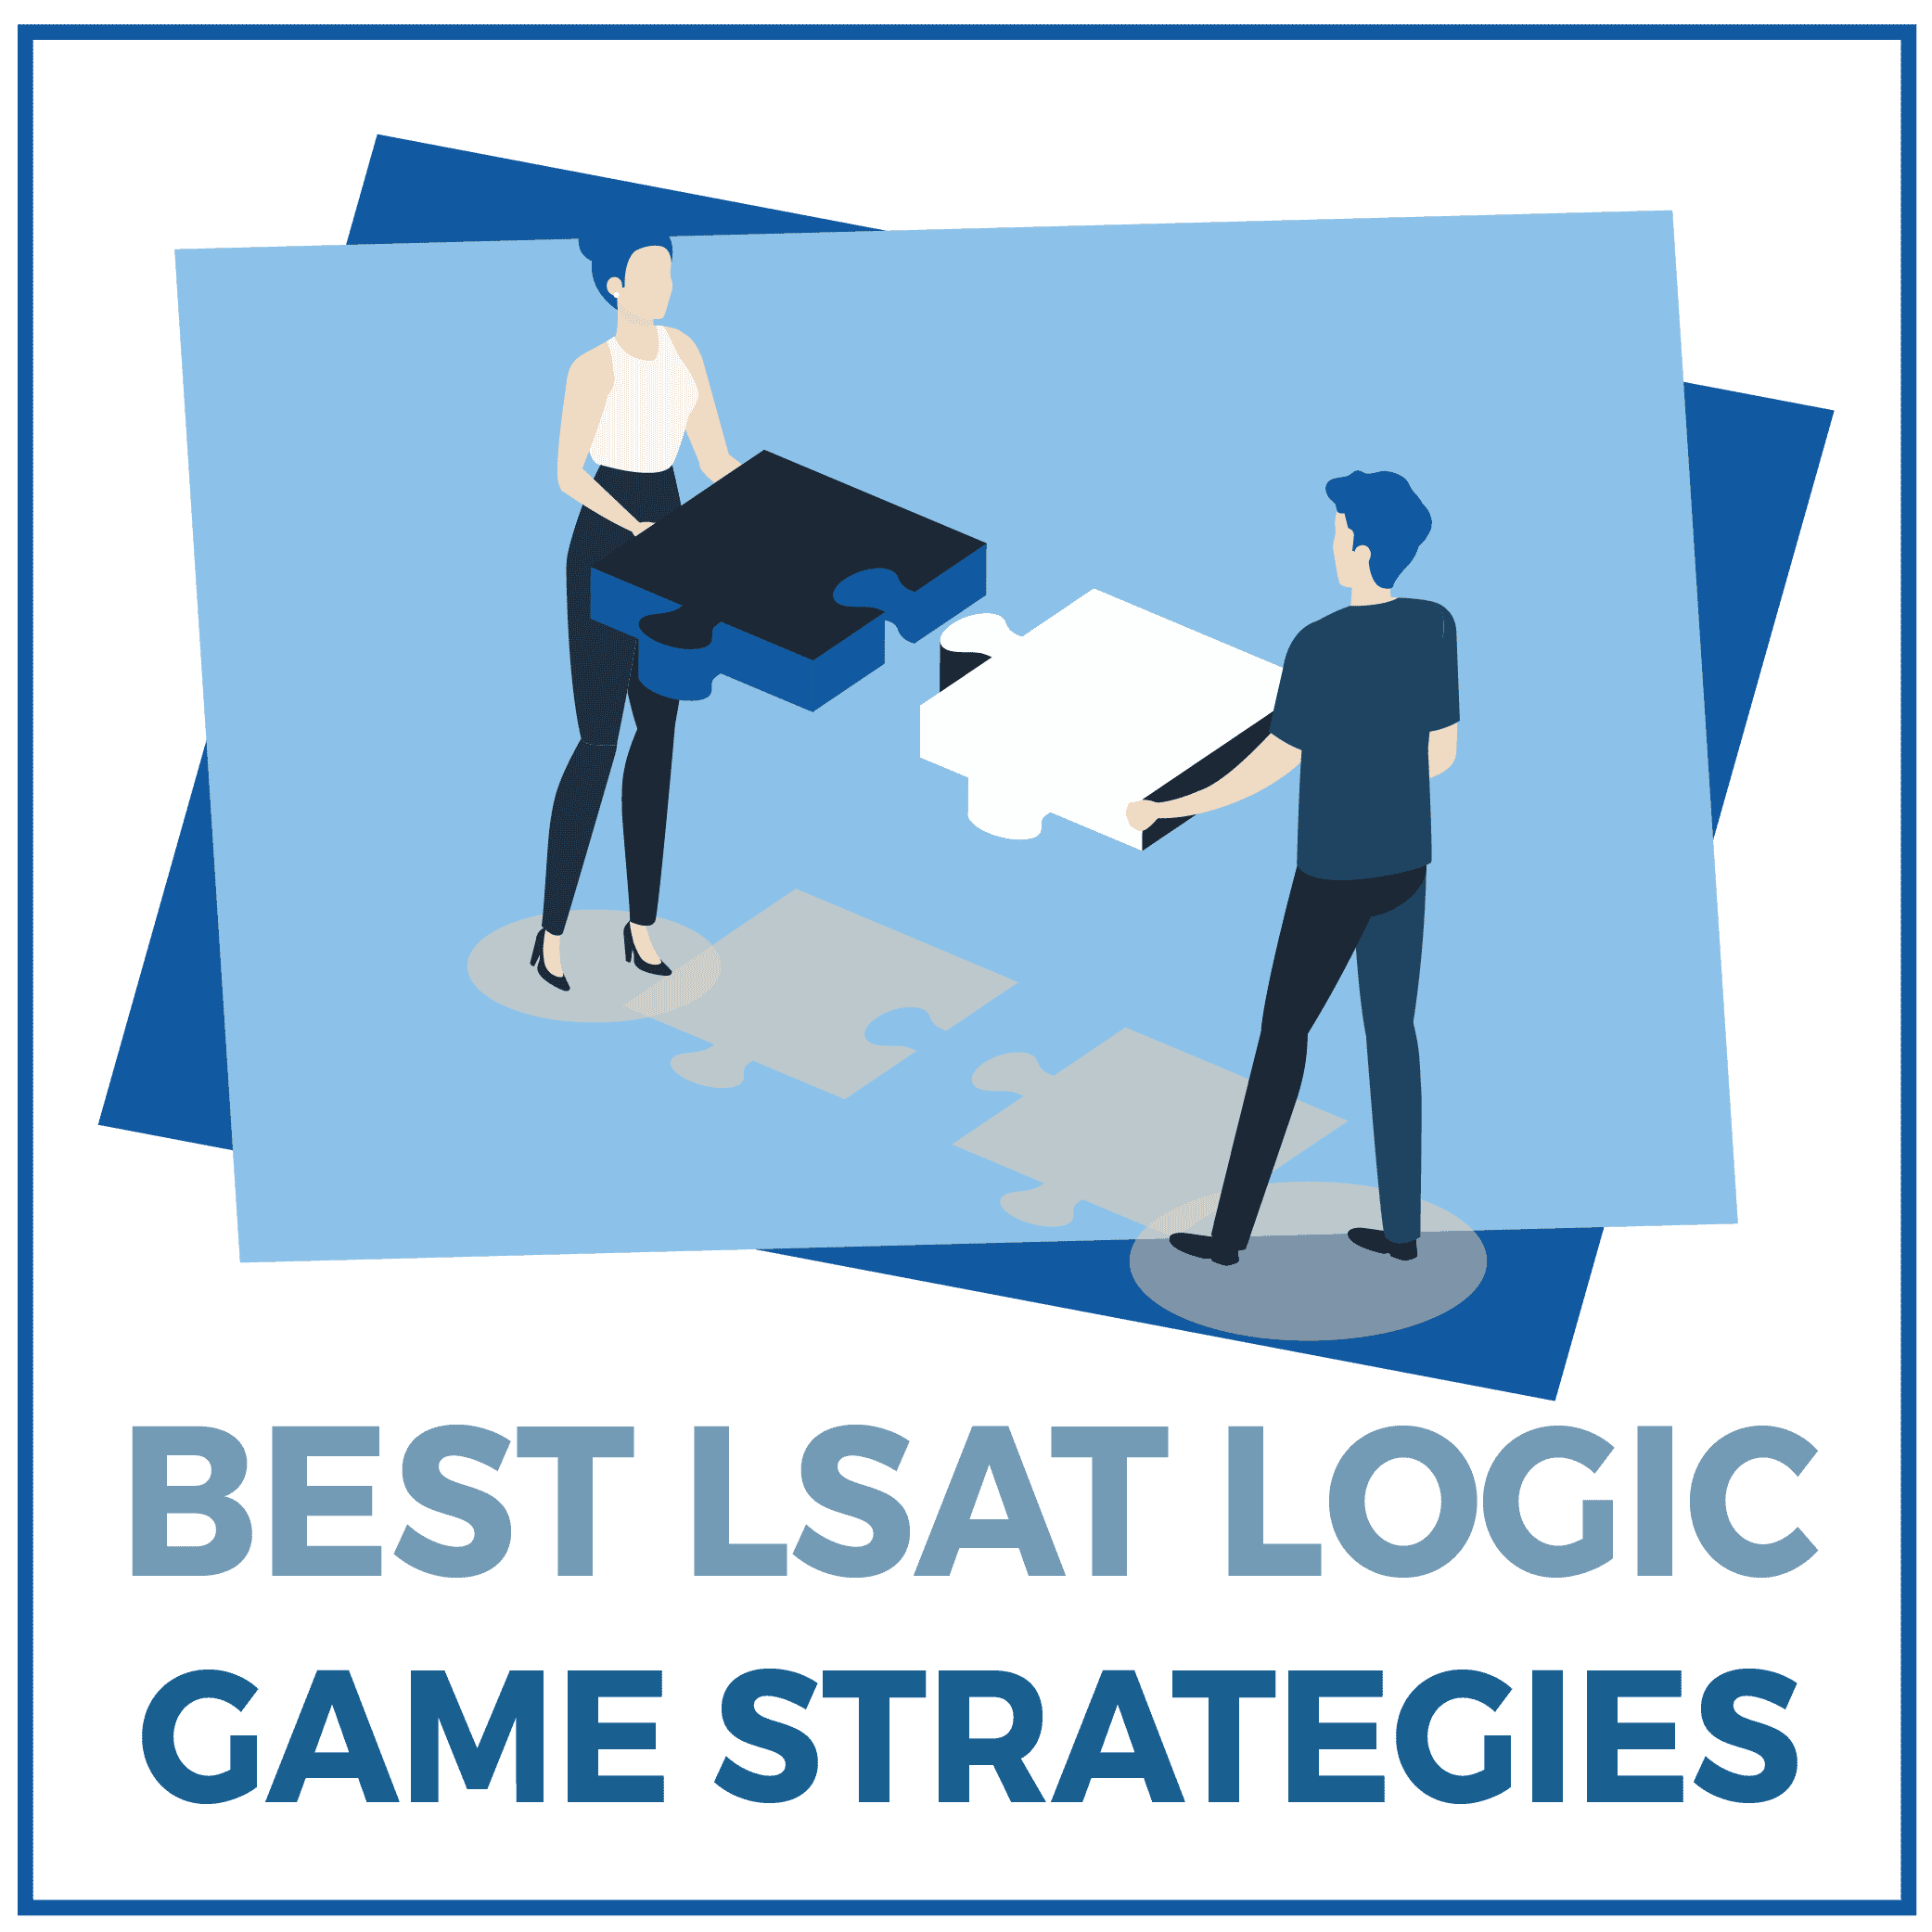 12 Best LSAT Logic Game Strategies How to Tackle the Toughest Part of